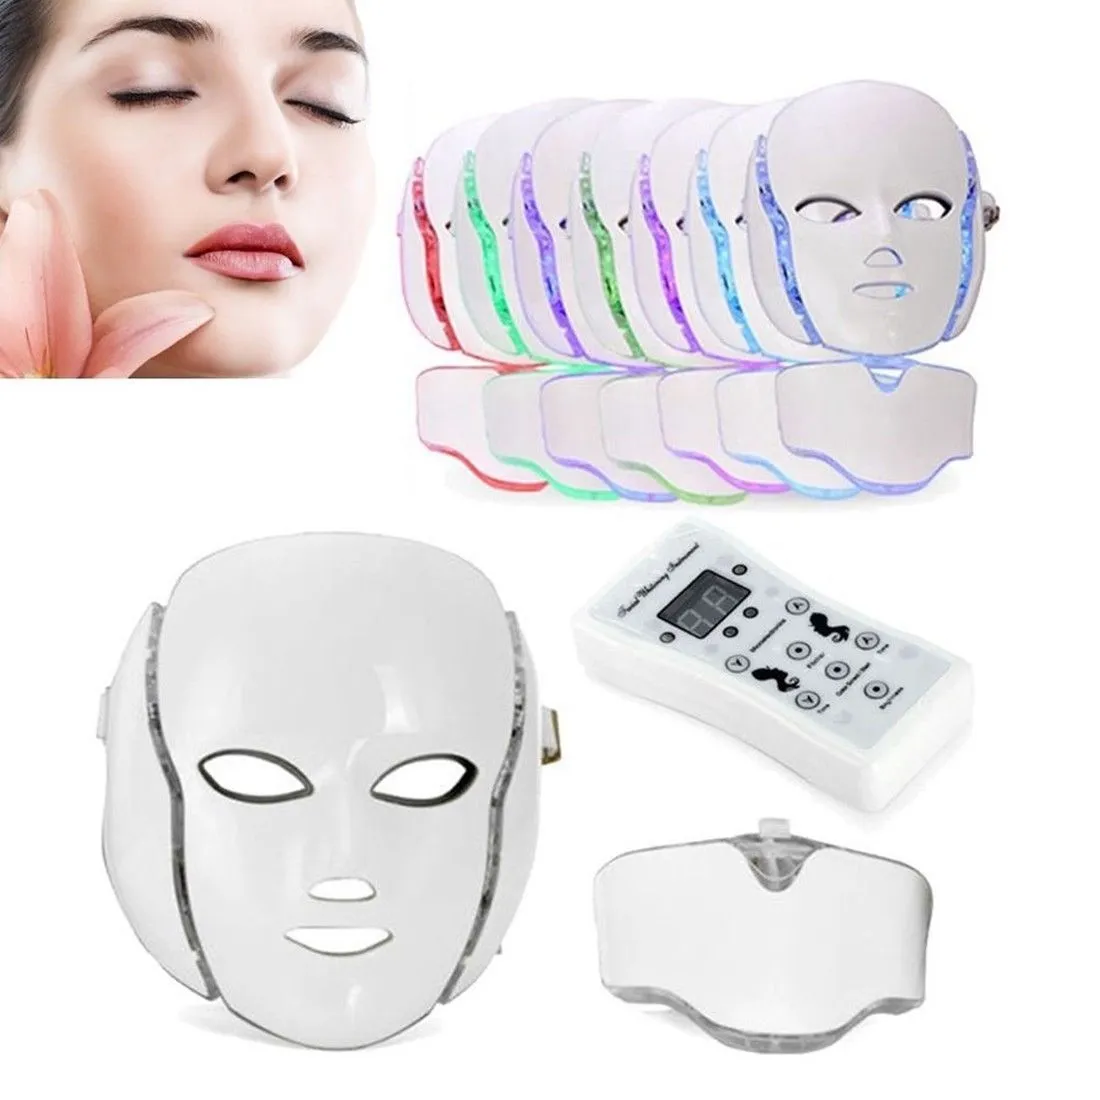 PDT 7 LED Light Therapy Face Beauty Machine LED Facial Neck Mask With Microcurrent for Skin Whitening Device